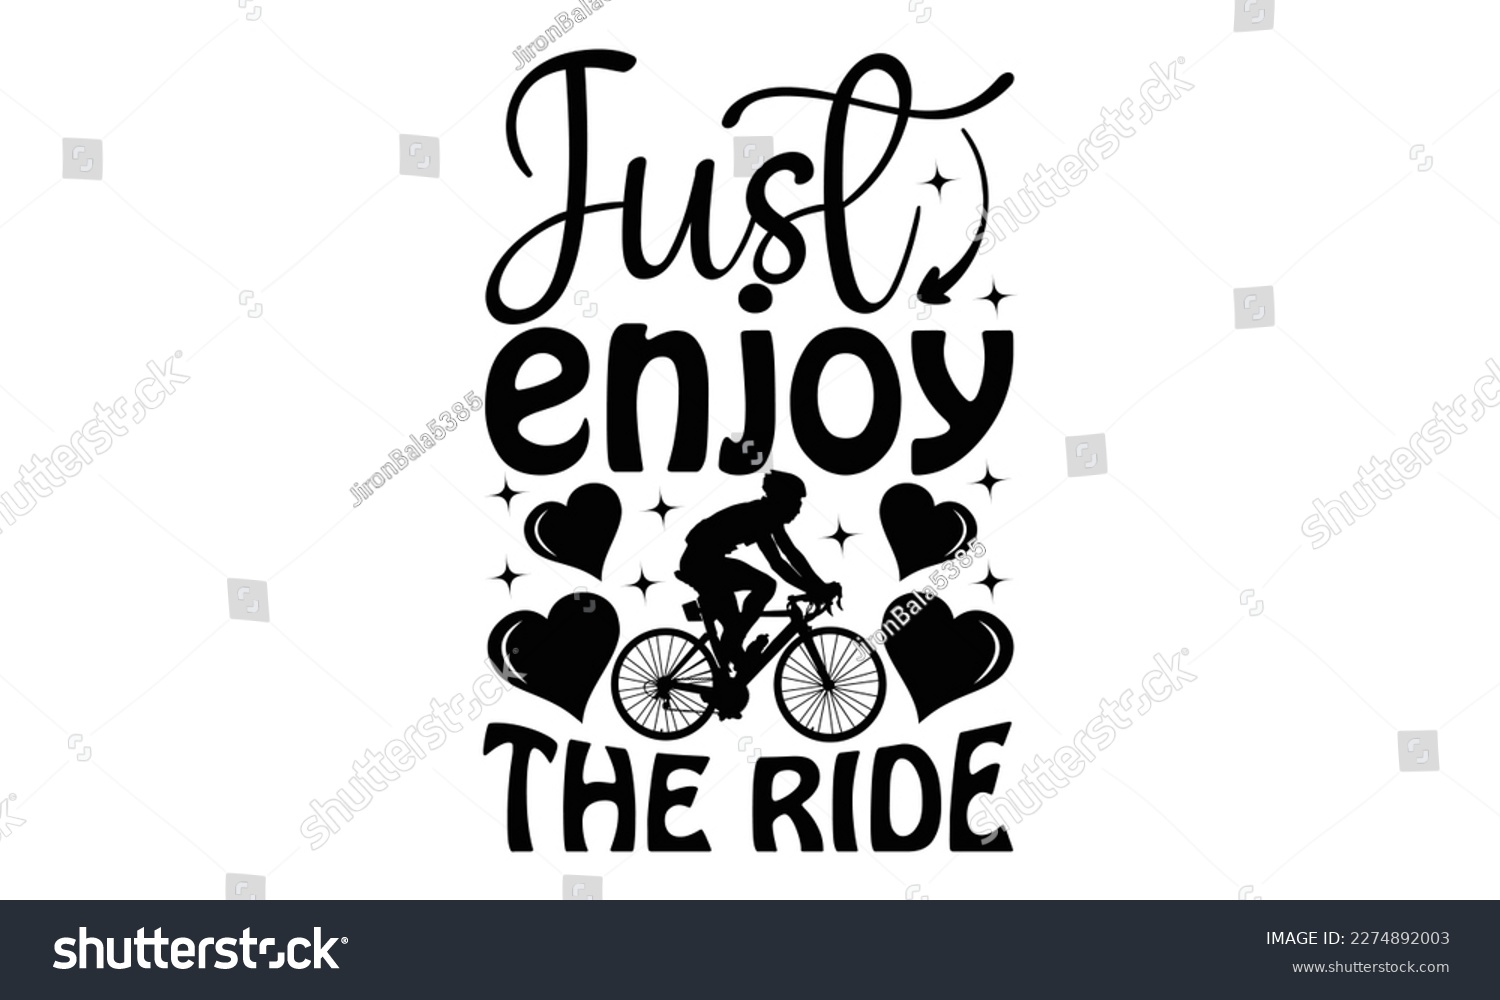 SVG of Bicycle Shop  Service - Cycle SVG Design, Calligraphy graphic design, Illustration for prints on t-shirts, bags, posters and cards, for Cutting Machine, Silhouette Cameo, Cricut. svg